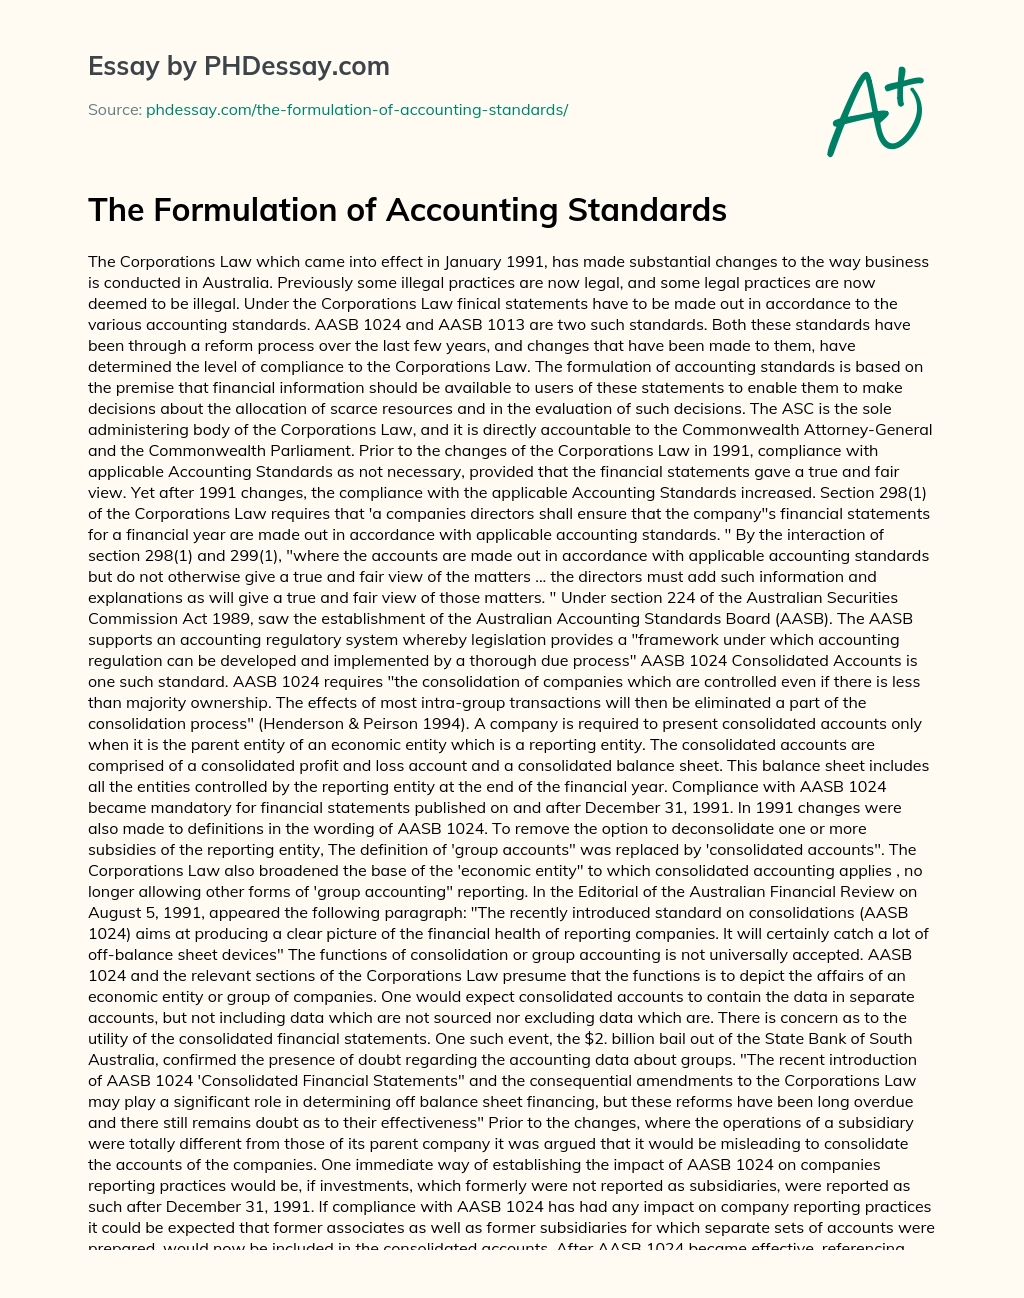 The Formulation of Accounting Standards essay